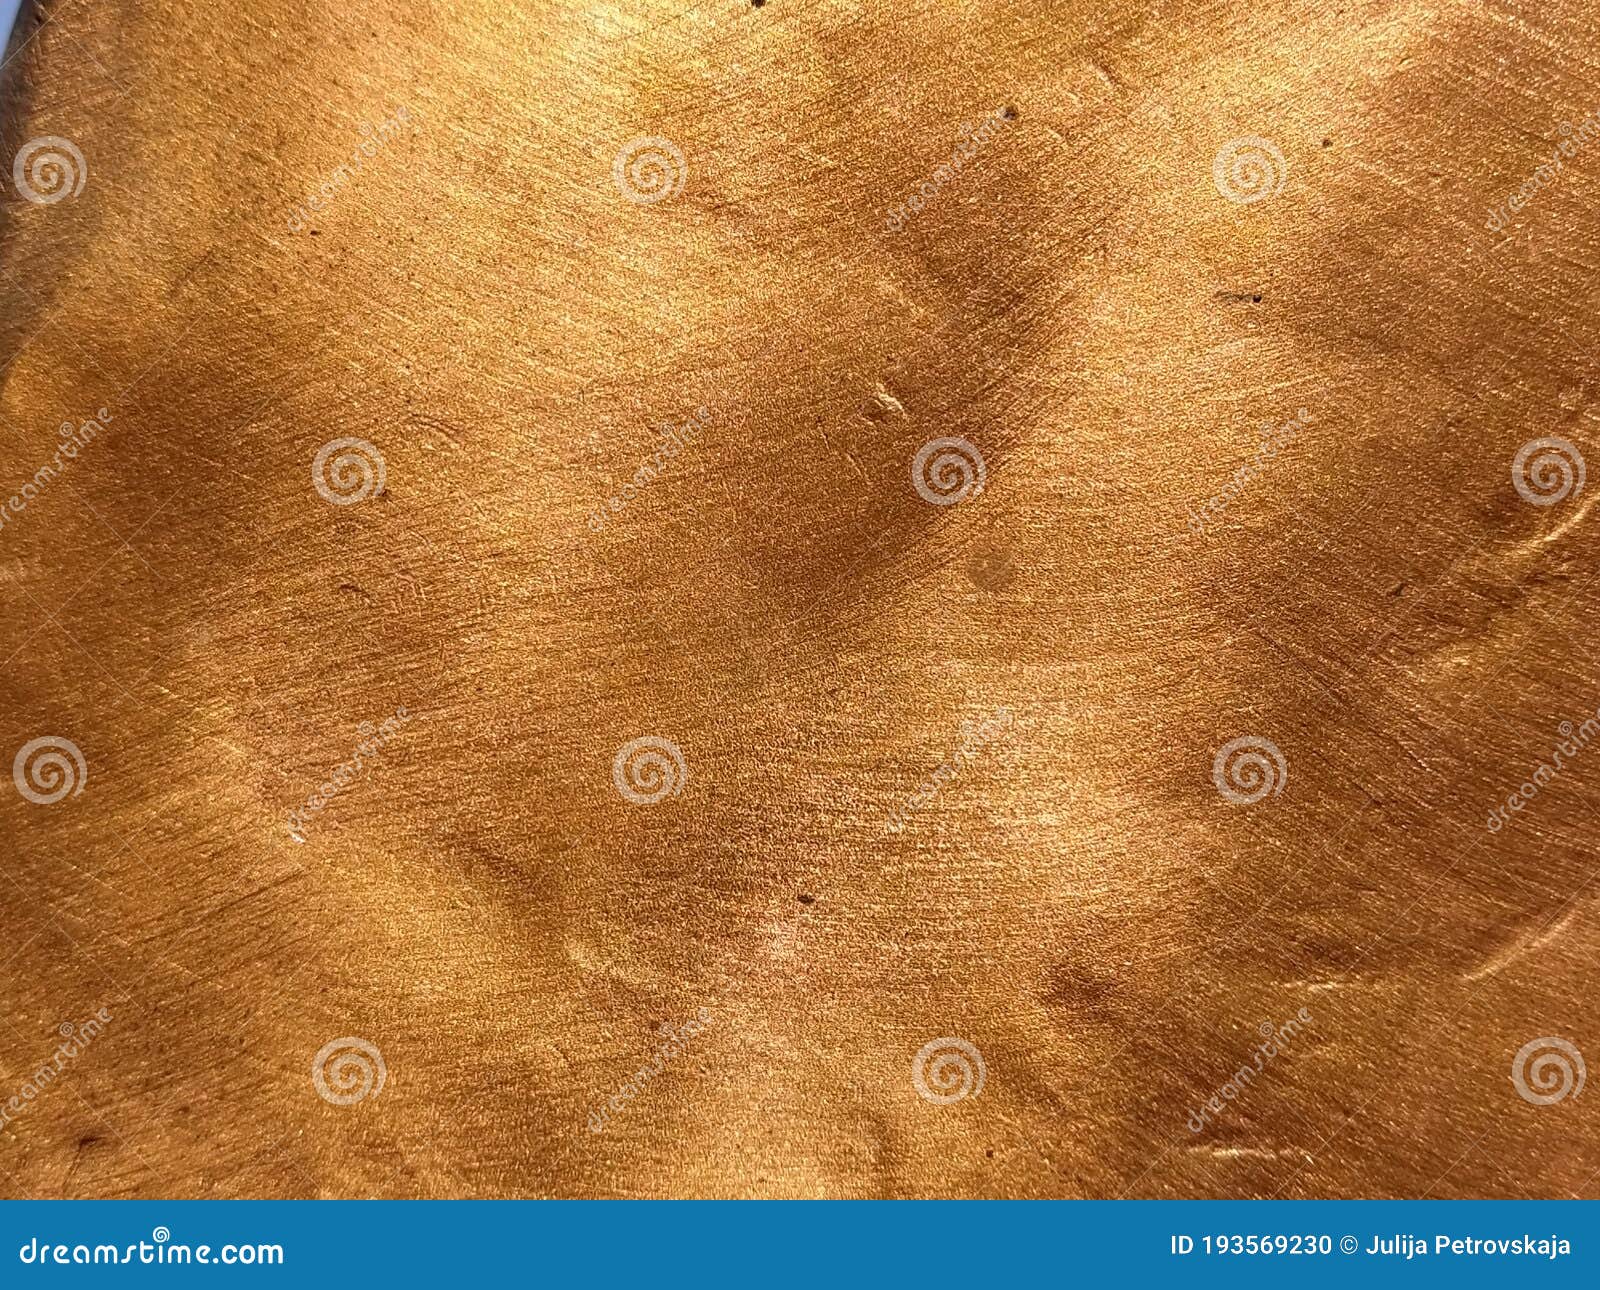 Copper Texture Background. Old Metal Stock Photo - Image of vintage, steel: 193569230